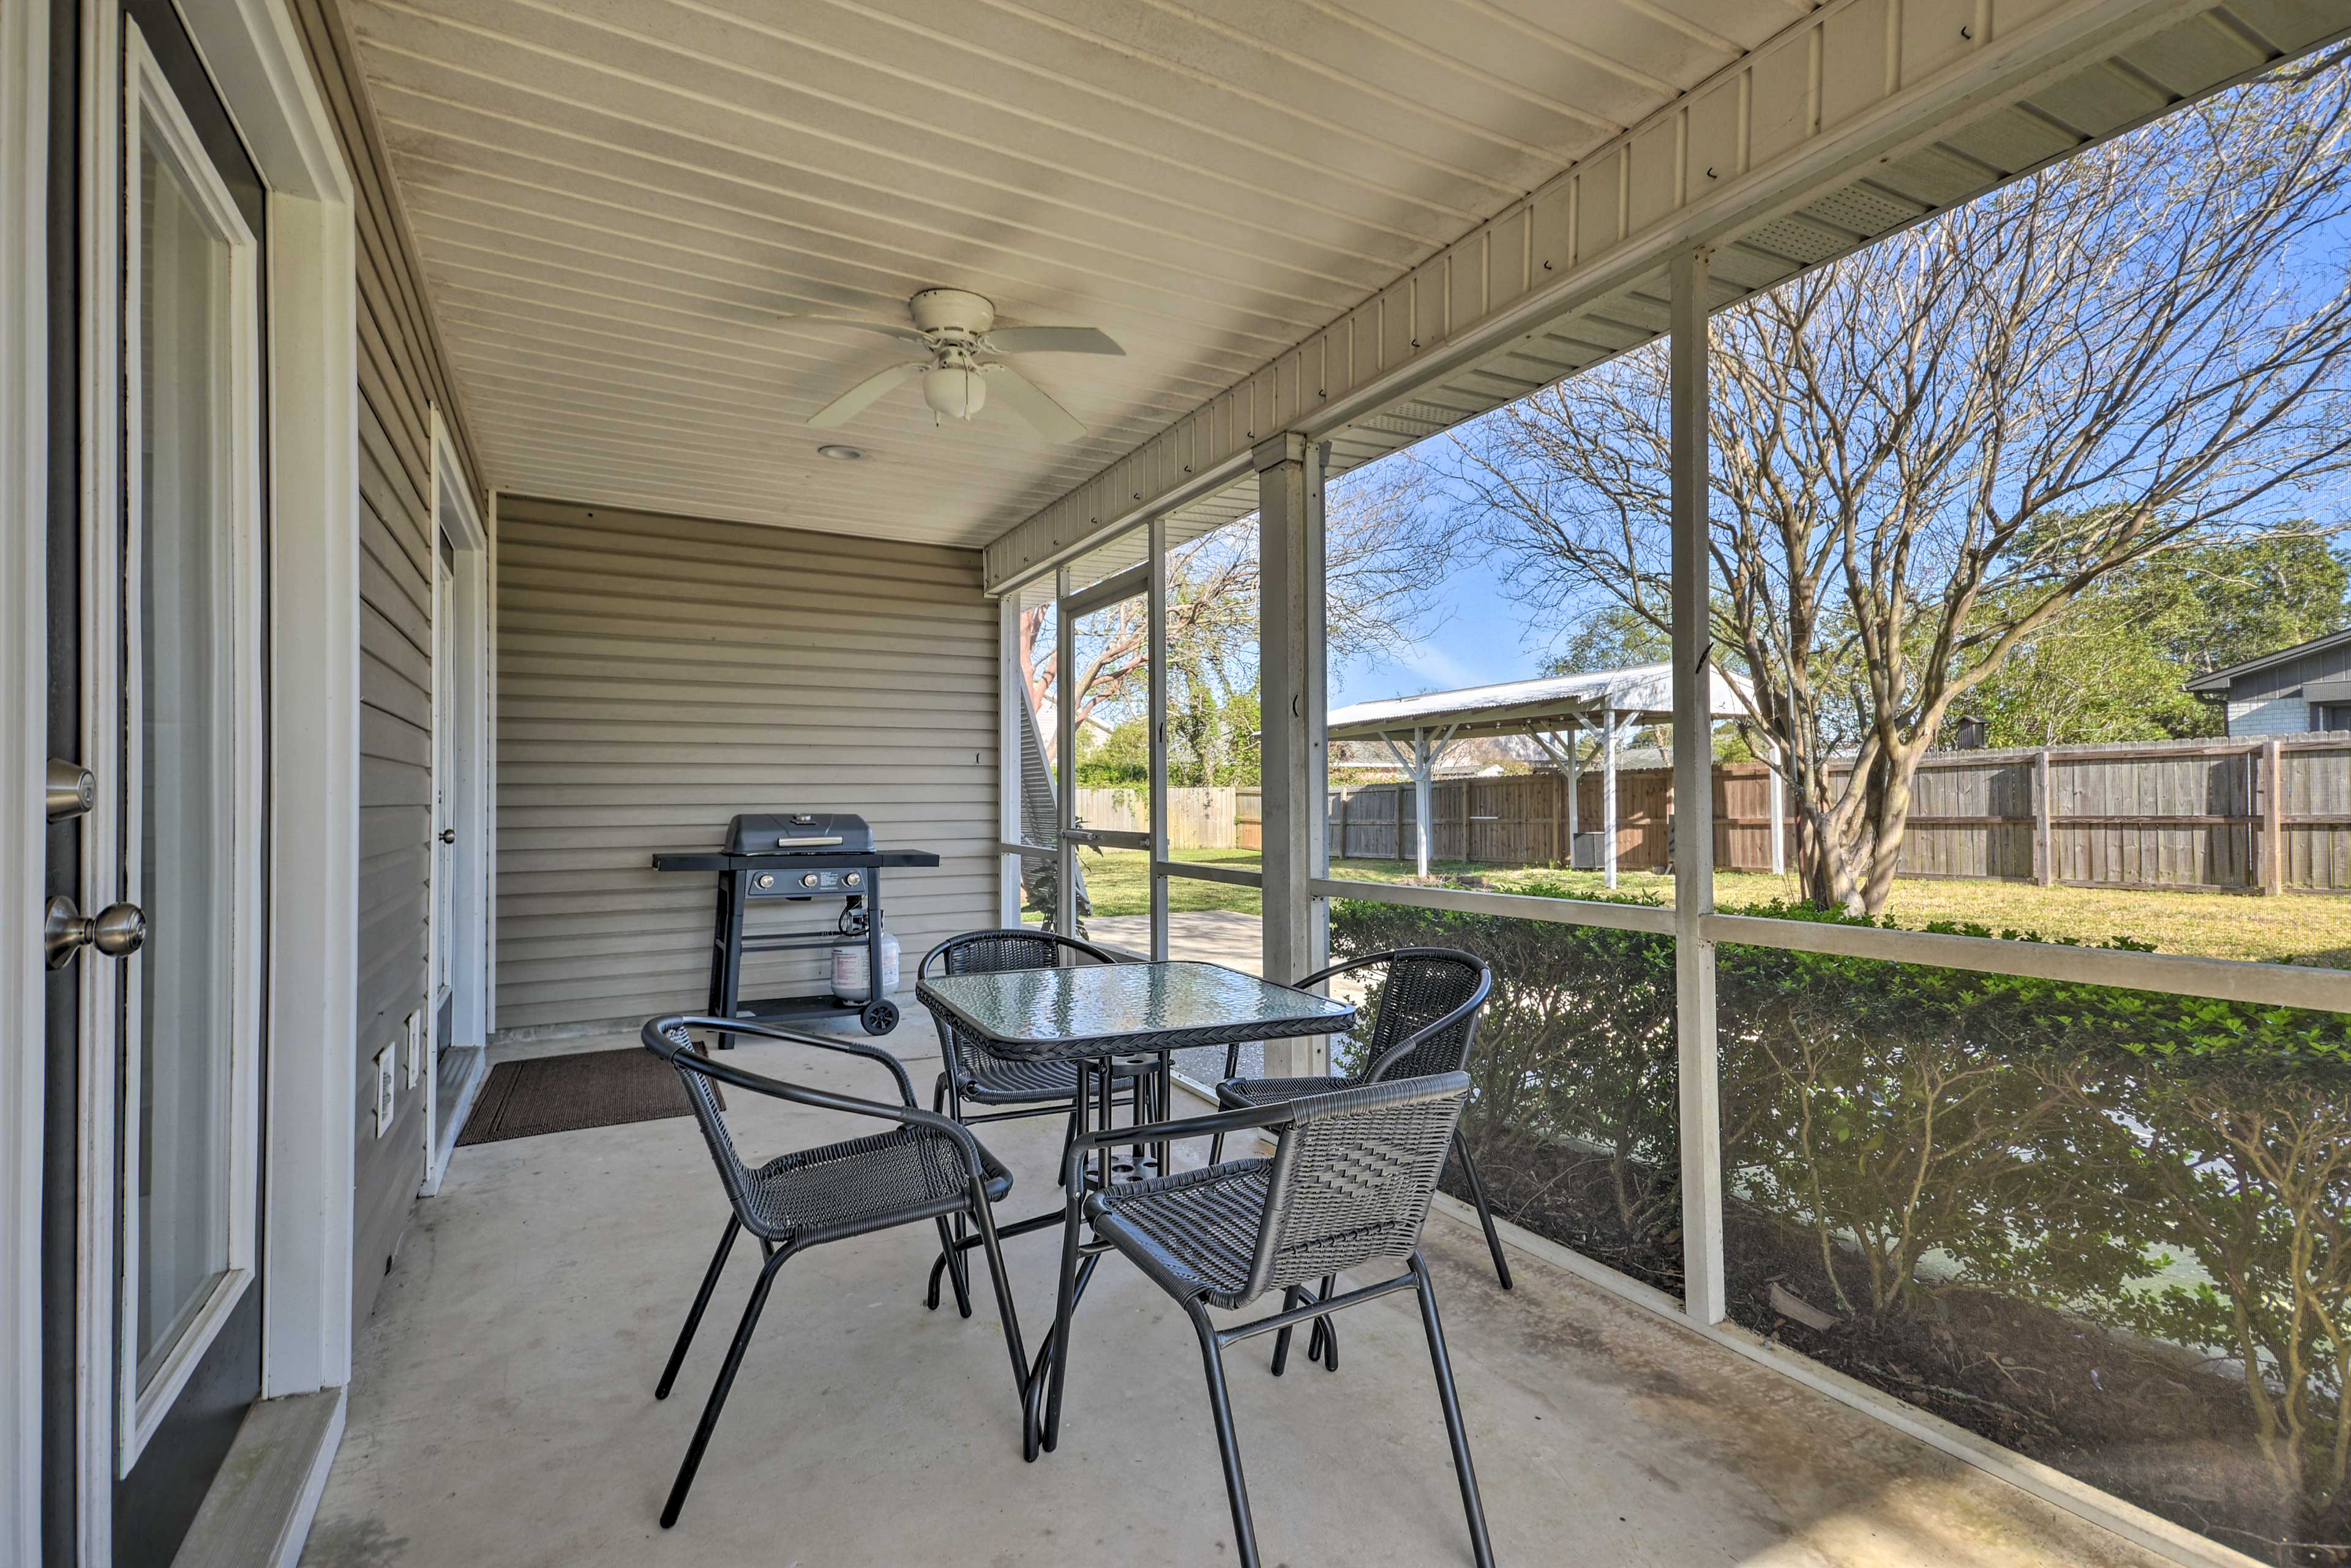 Screened Porch | Grill Not Available